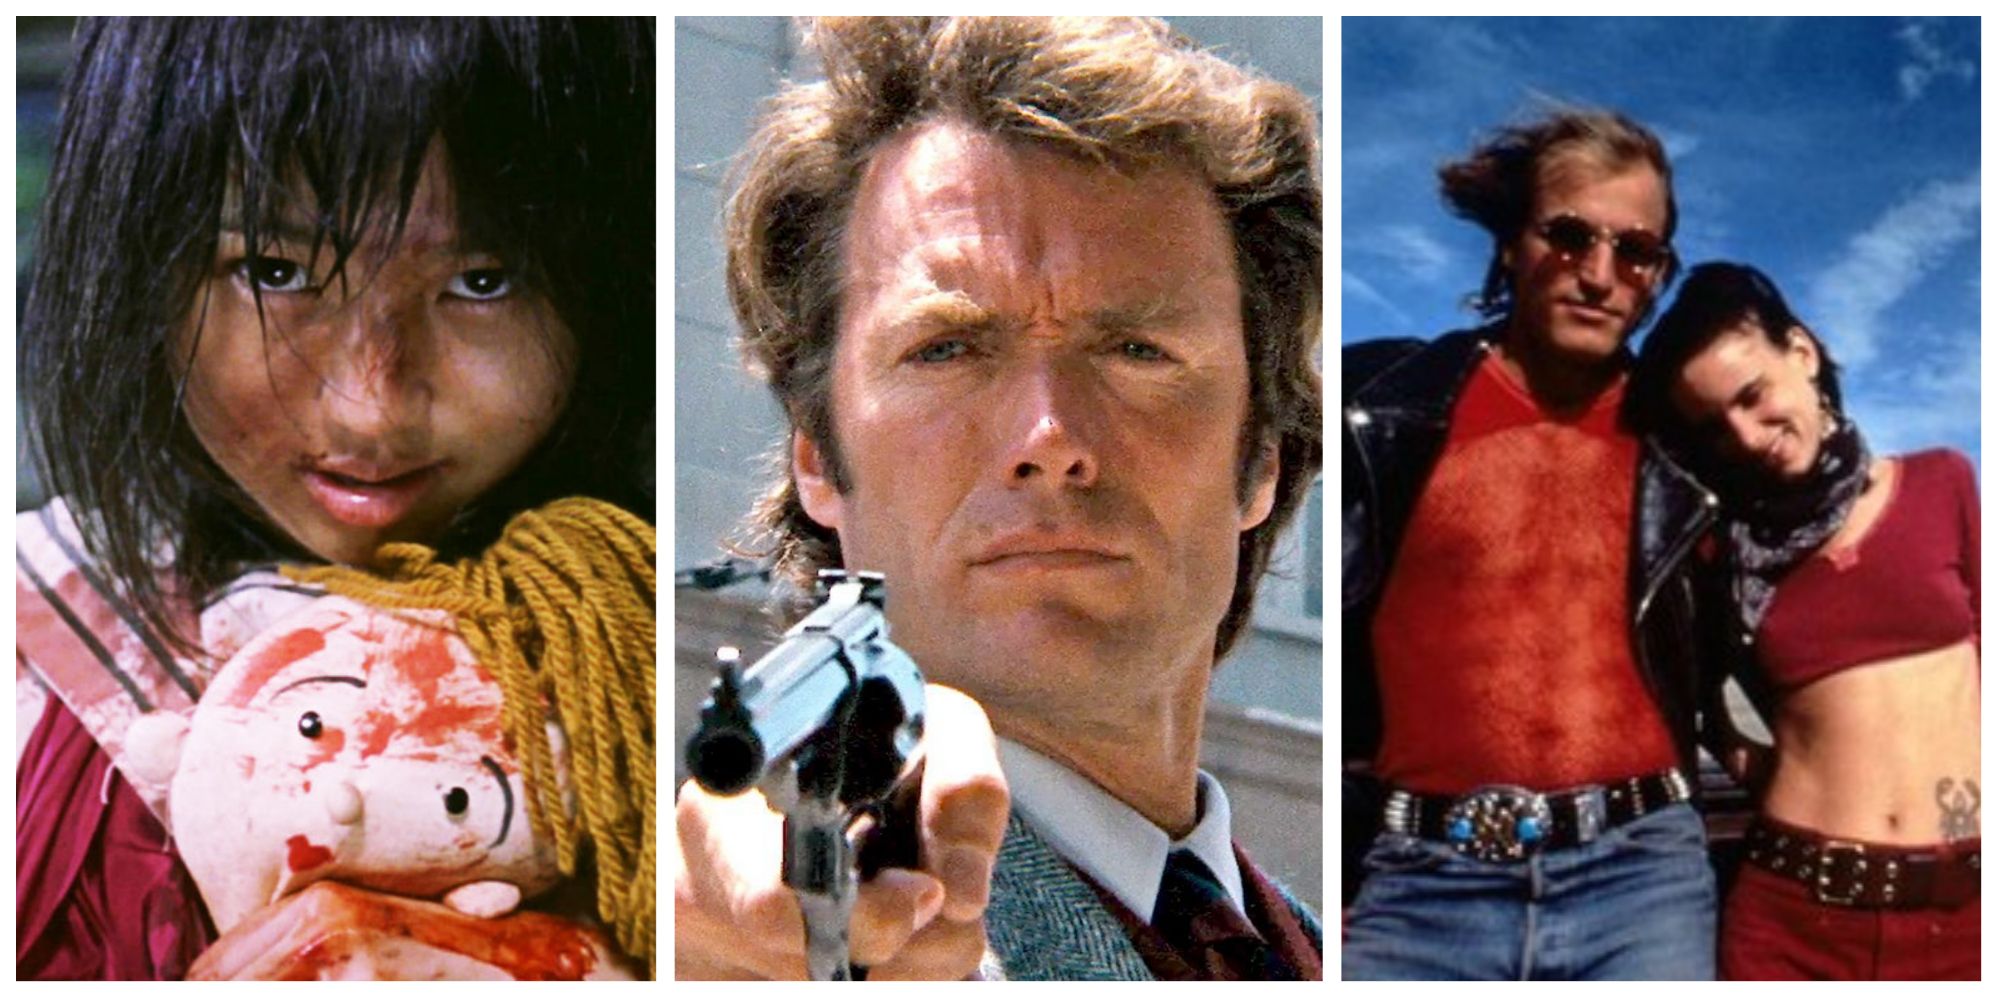 Collage of battle royale, dirty harry, and natural born killers